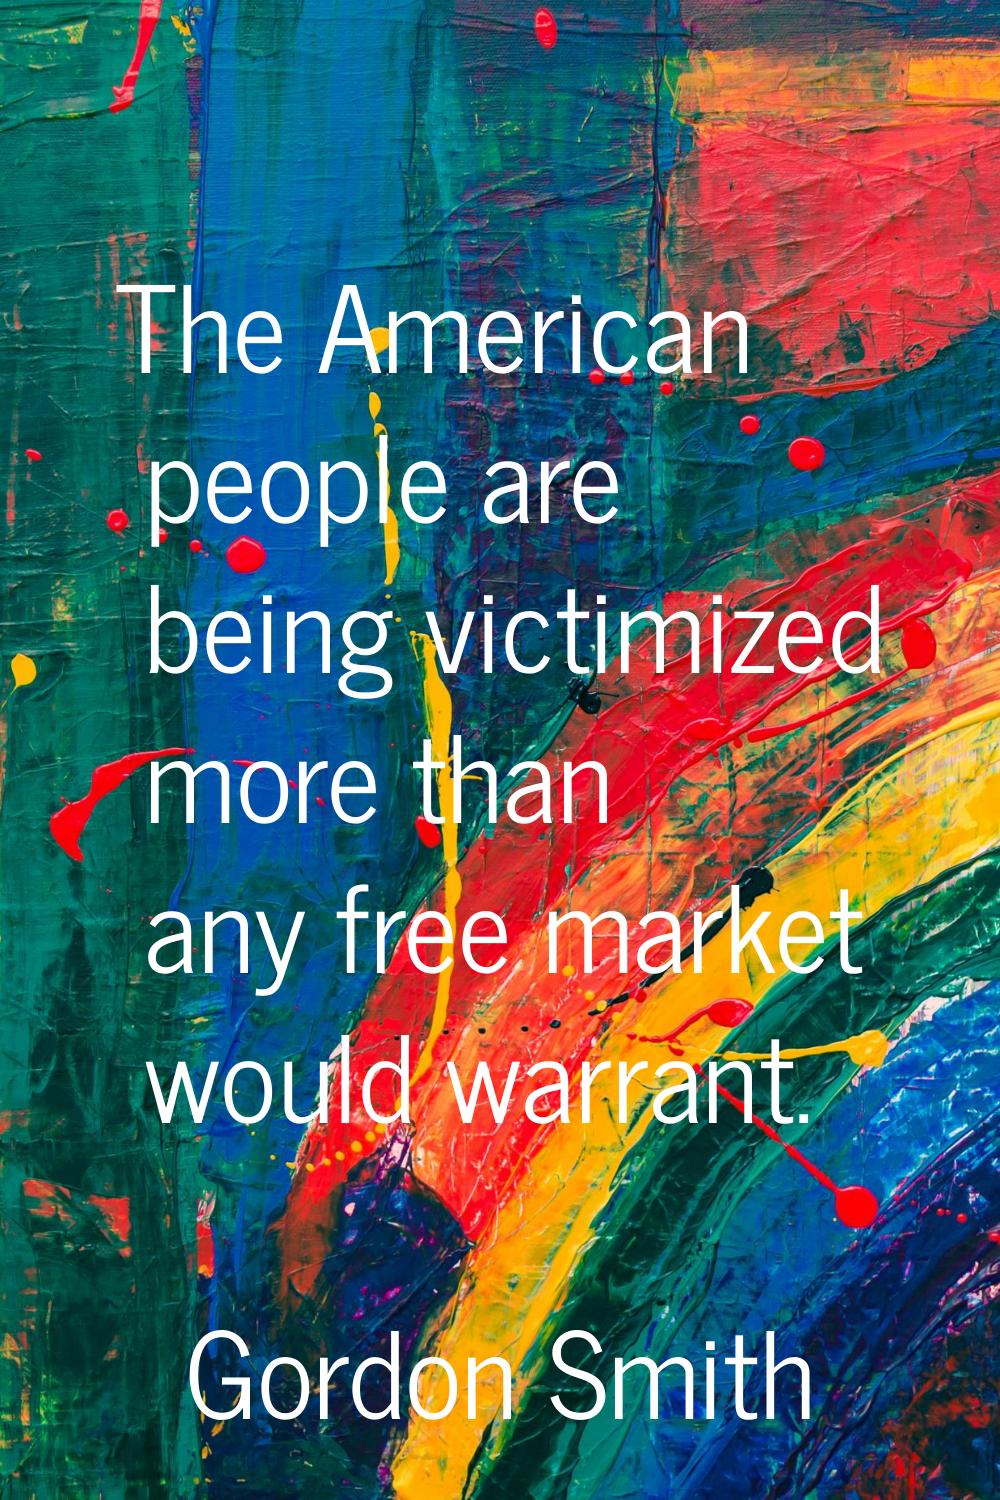 The American people are being victimized more than any free market would warrant.